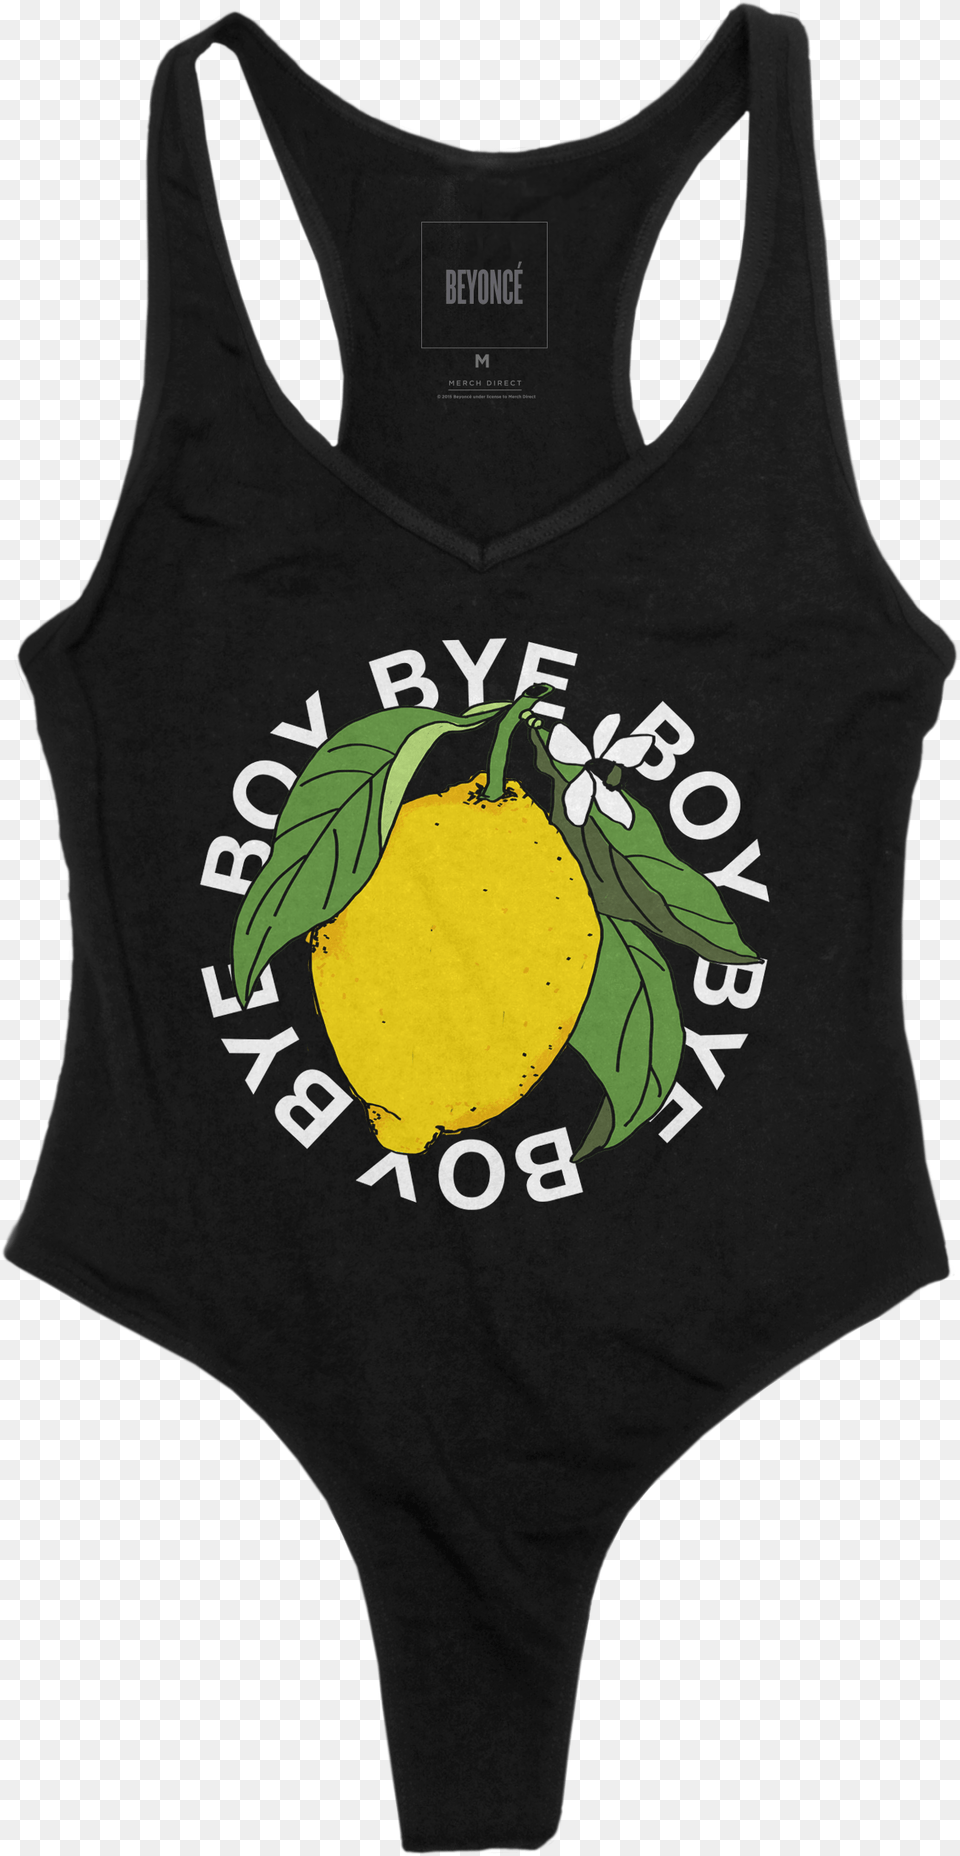 Get The Latest Updates On This Topic In Your Boy Bye Beyonce Bodysuit, Food, Fruit, Plant, Produce Free Transparent Png